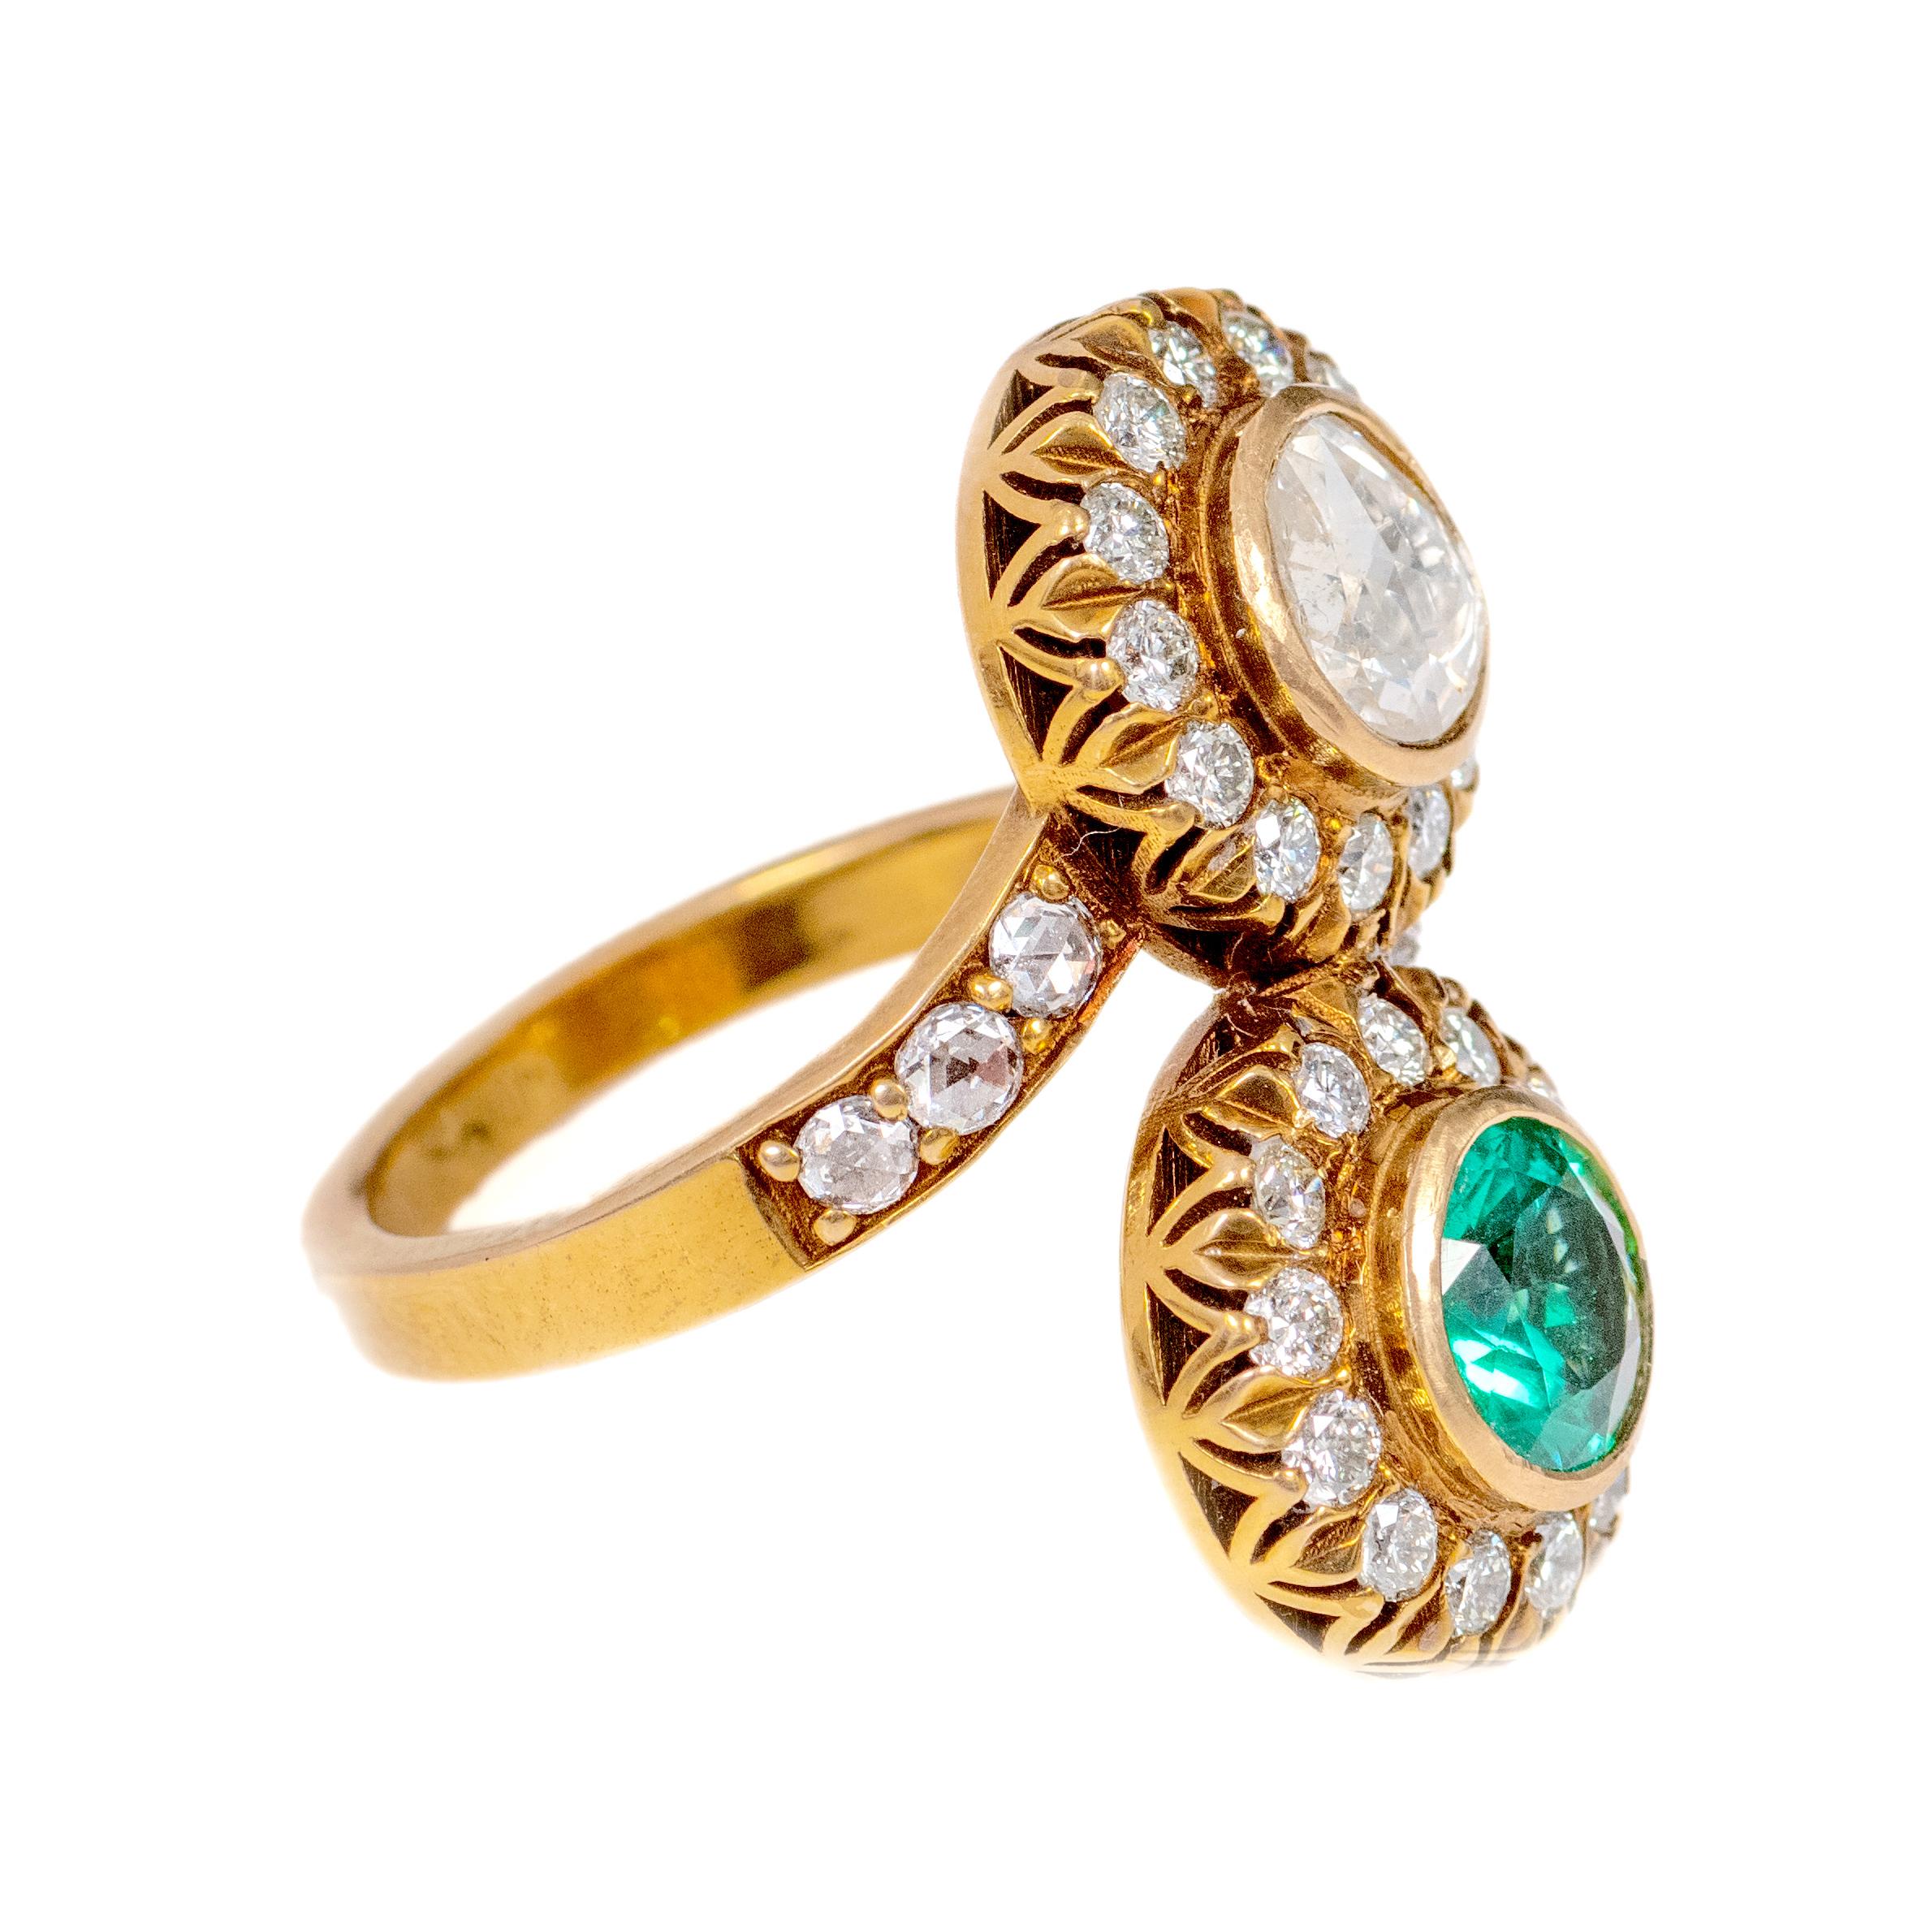 18 Karat Gold 2.18 Carat Diamond and Emerald Art-Deco Style Ring

Elevate your personal style with our exquisite 18 Karat Gold Diamond and Emerald Art-Deco Style Ring—a true masterpiece that harmoniously blends timeless sophistication with modern